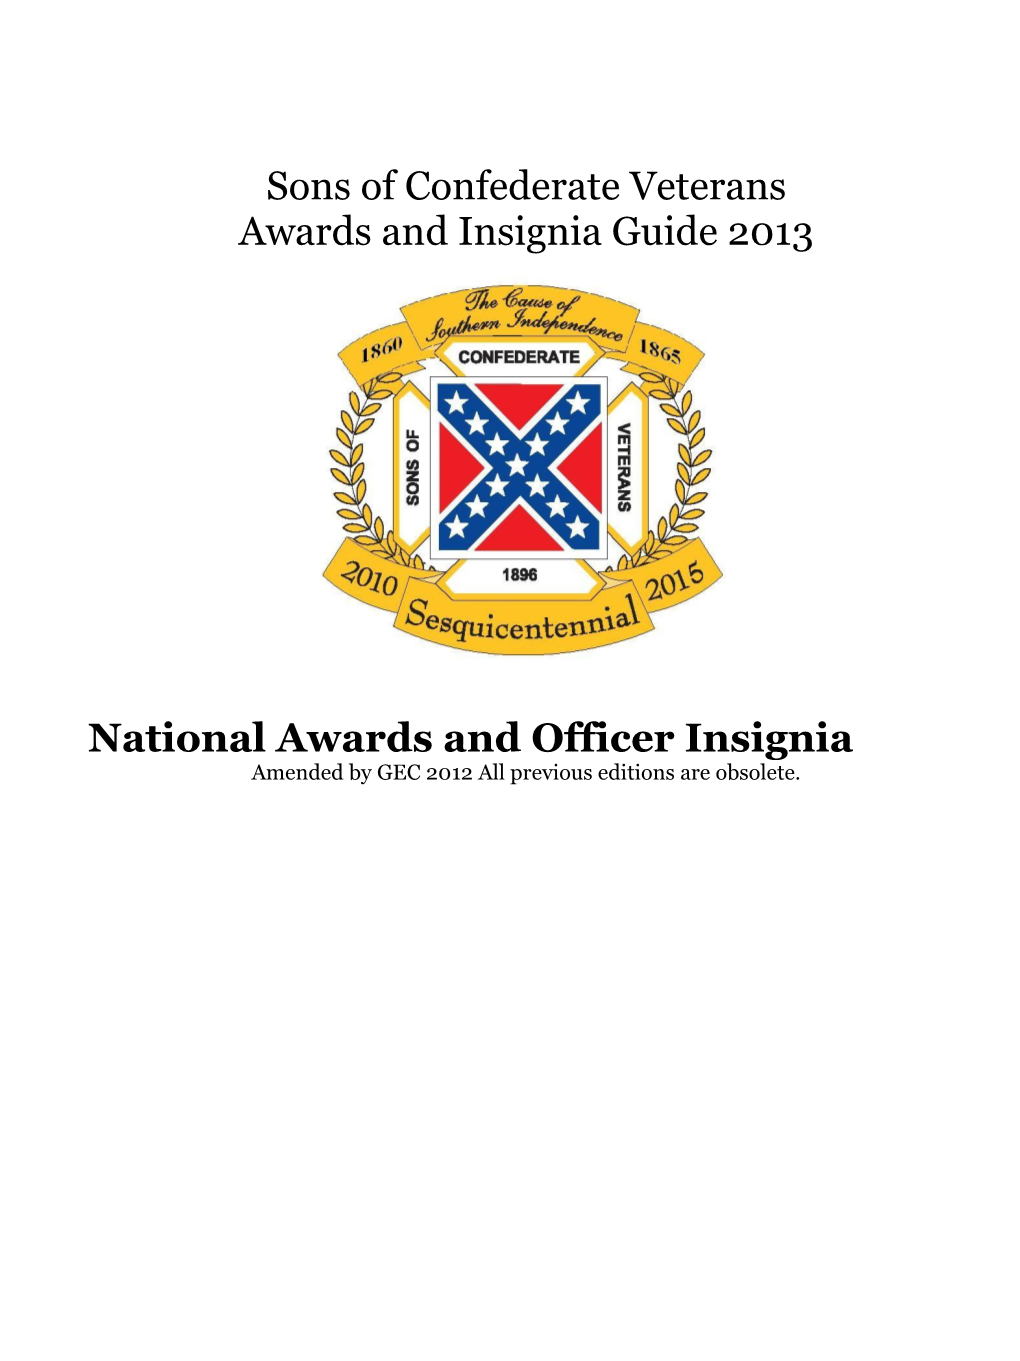 Sons of Confederate Veterans Awards and Insignia Guide 2013 National